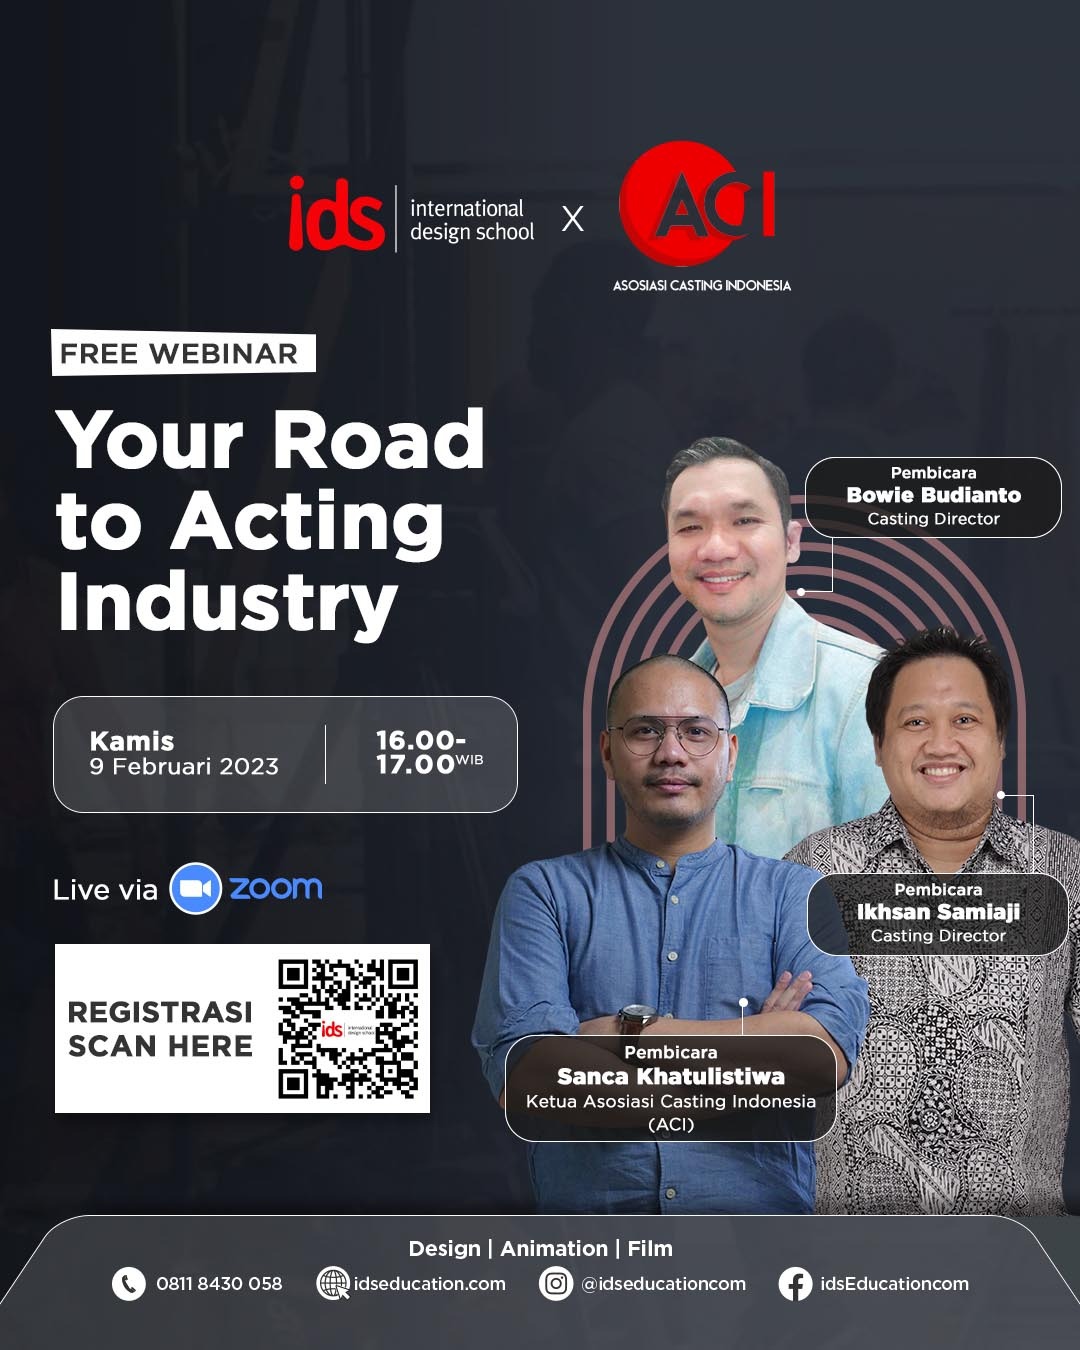 IDS x ACI Your Road to Acting Industry